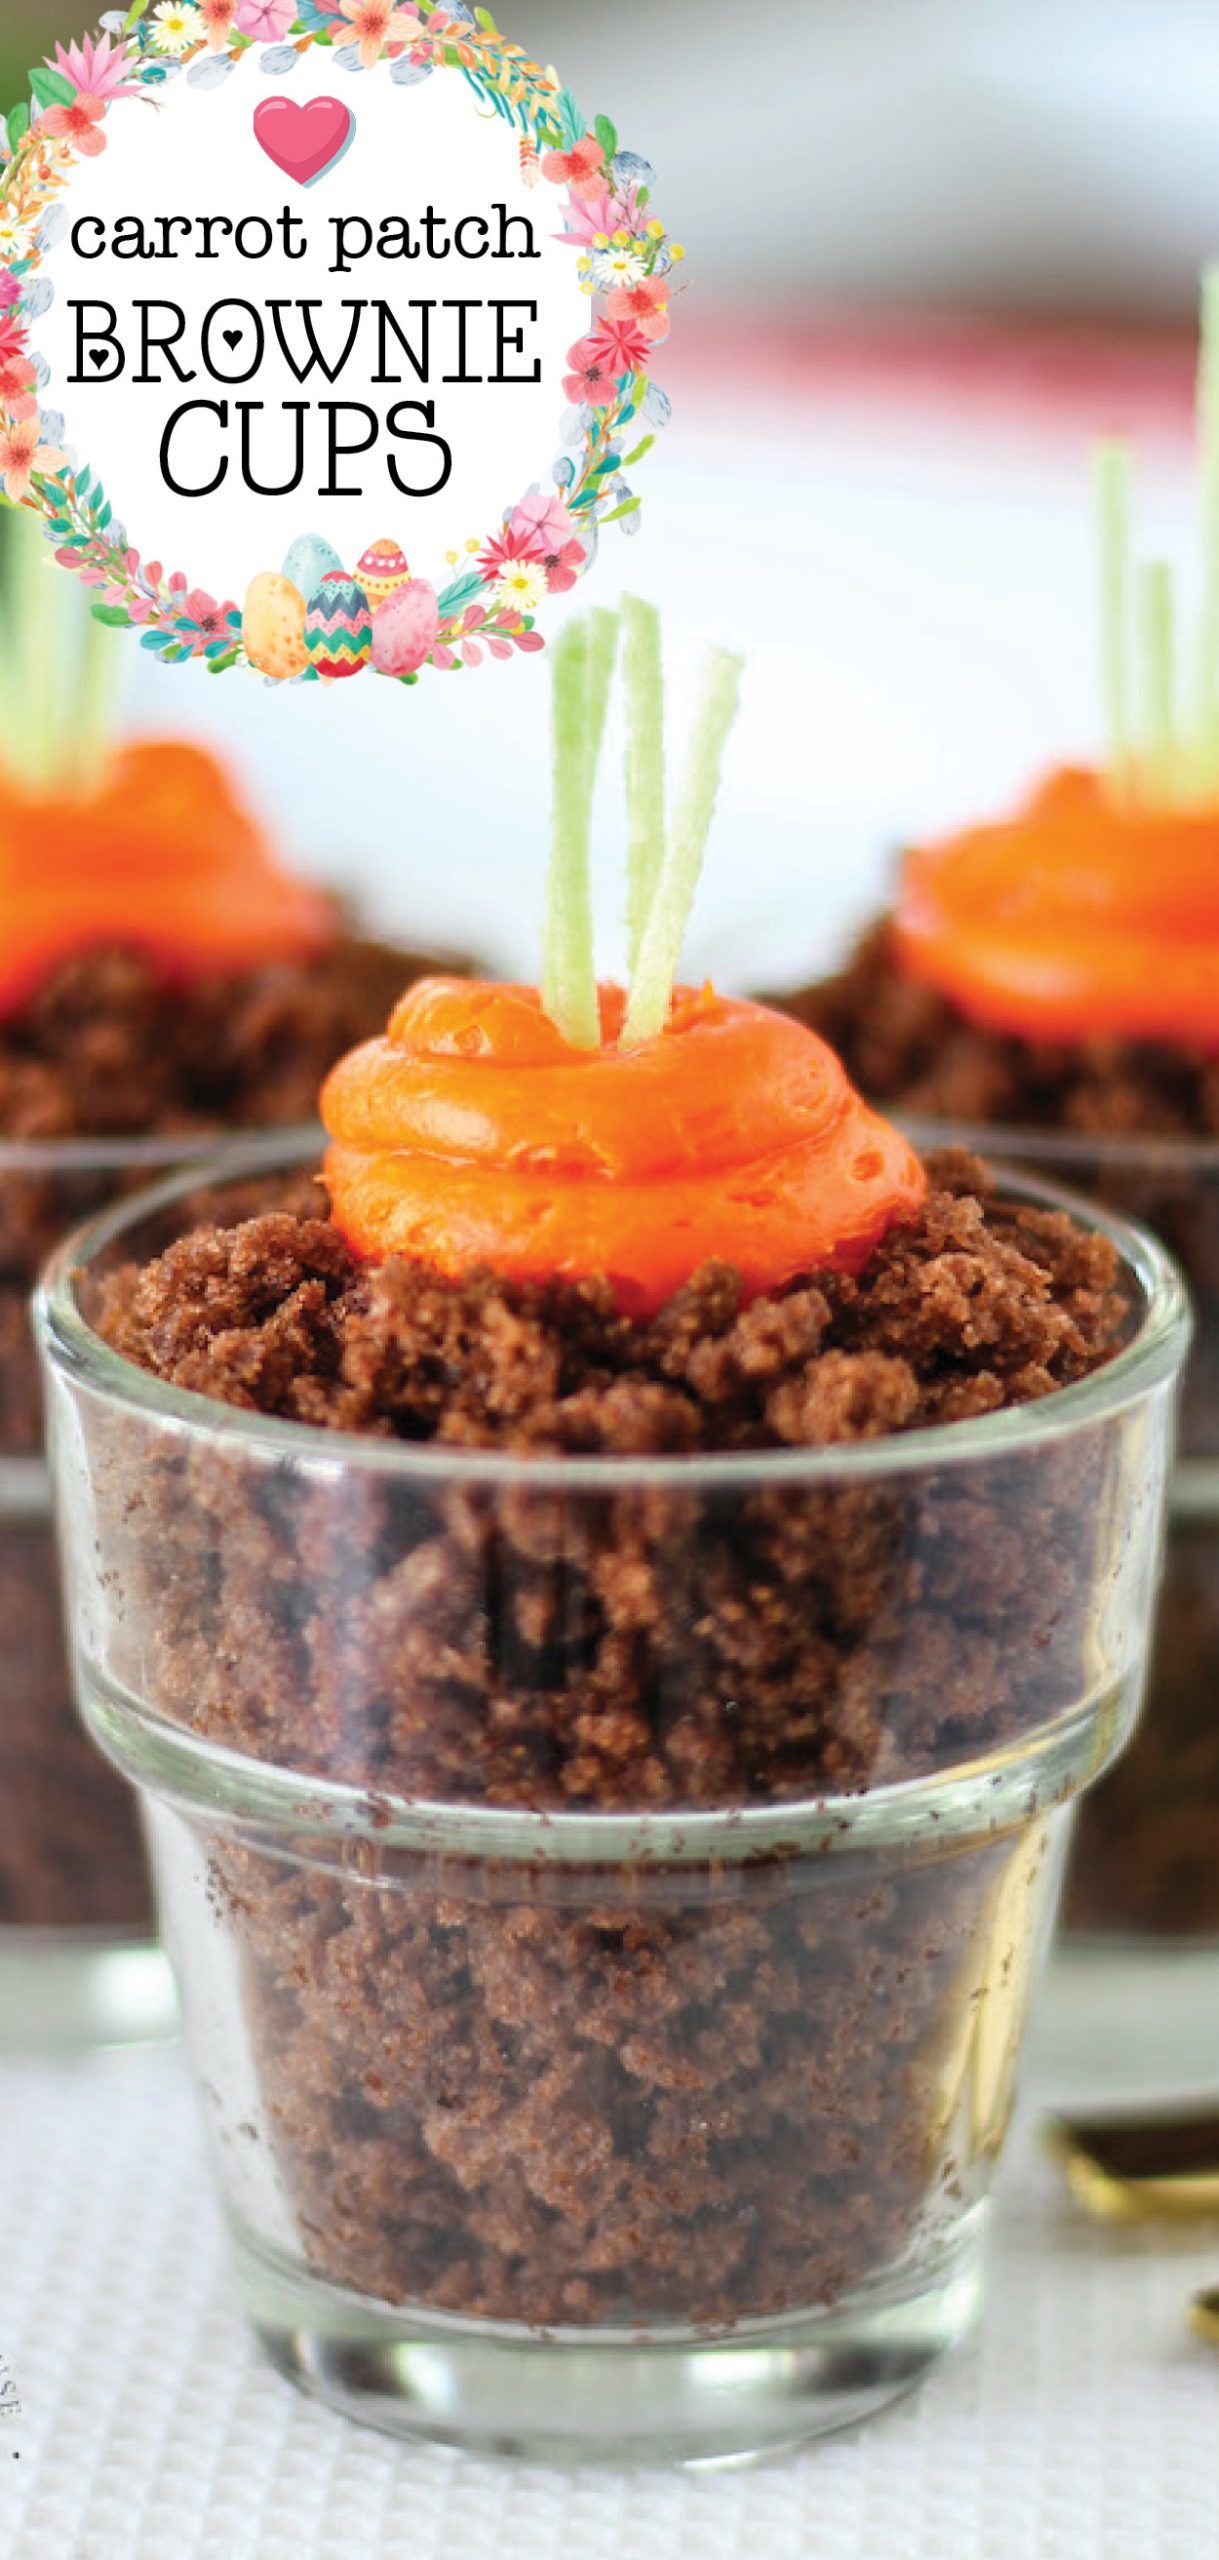 Carrot Patch Brownie Cups - Aren’t these the cutest little carrots? Fancy desserts are nice and all but there is just something that makes my heart smile to see cute holiday these desserts on the table.